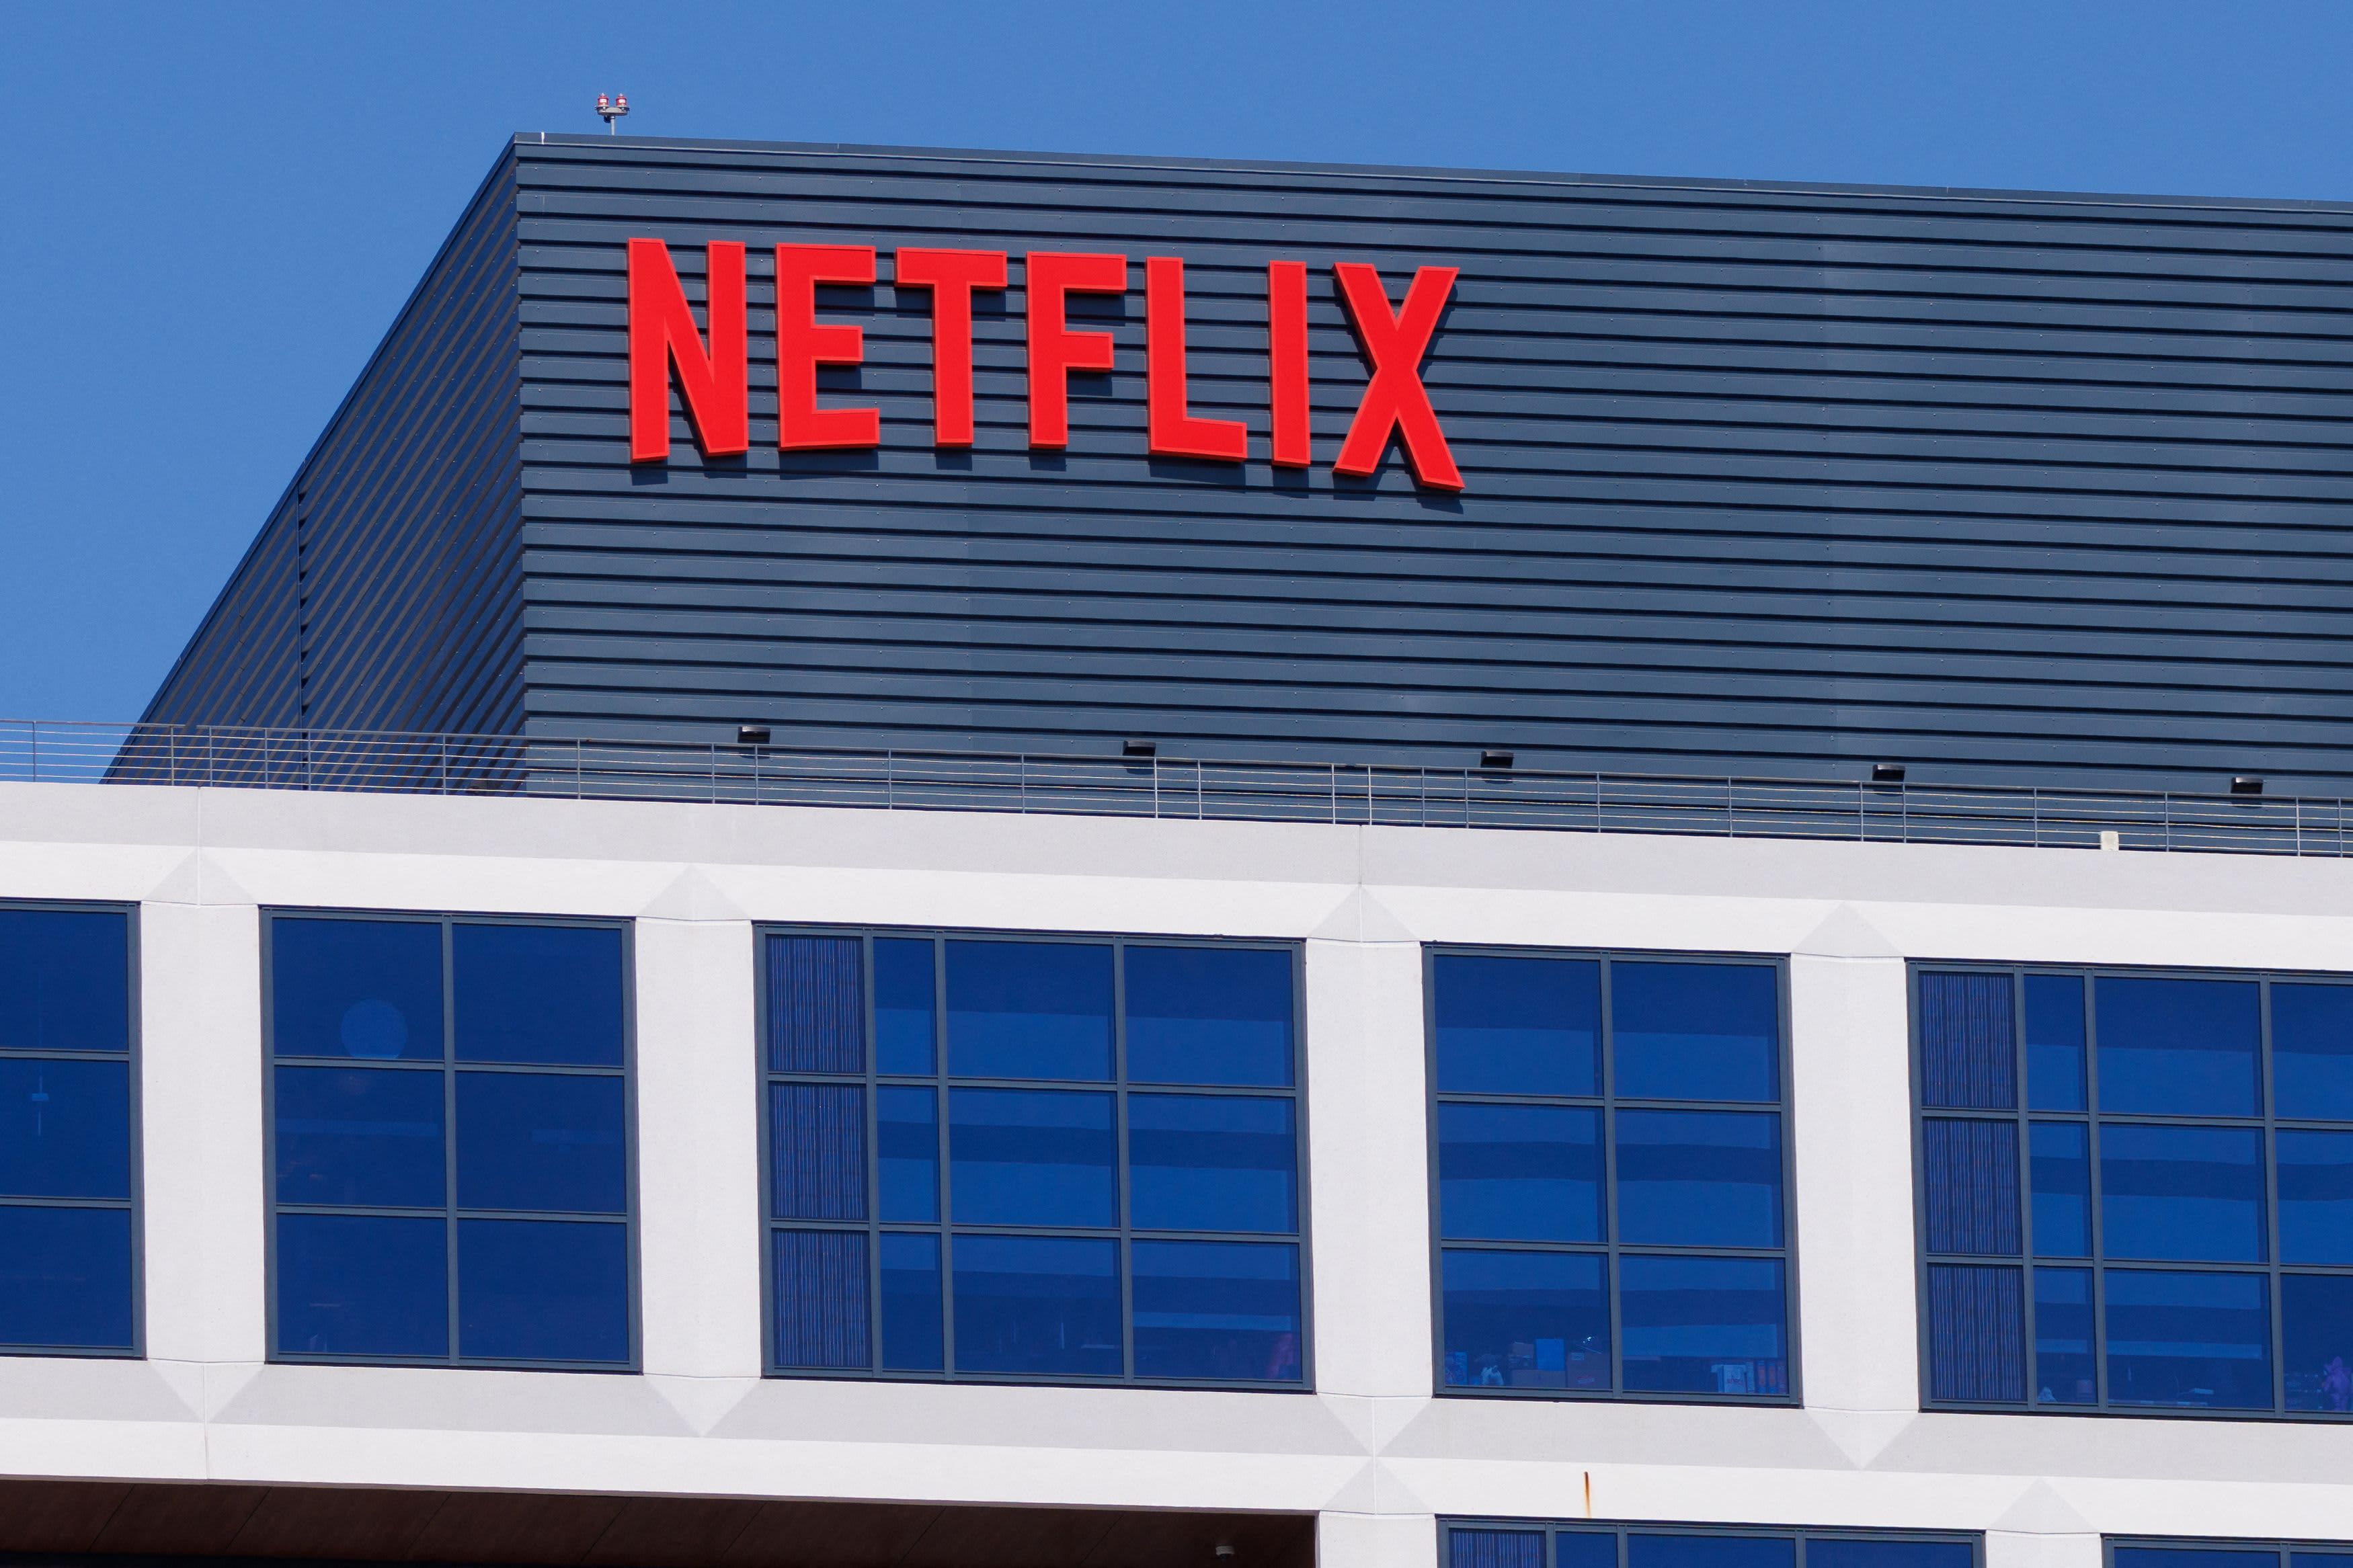 Baird says Netflix shares can once again trade at $500